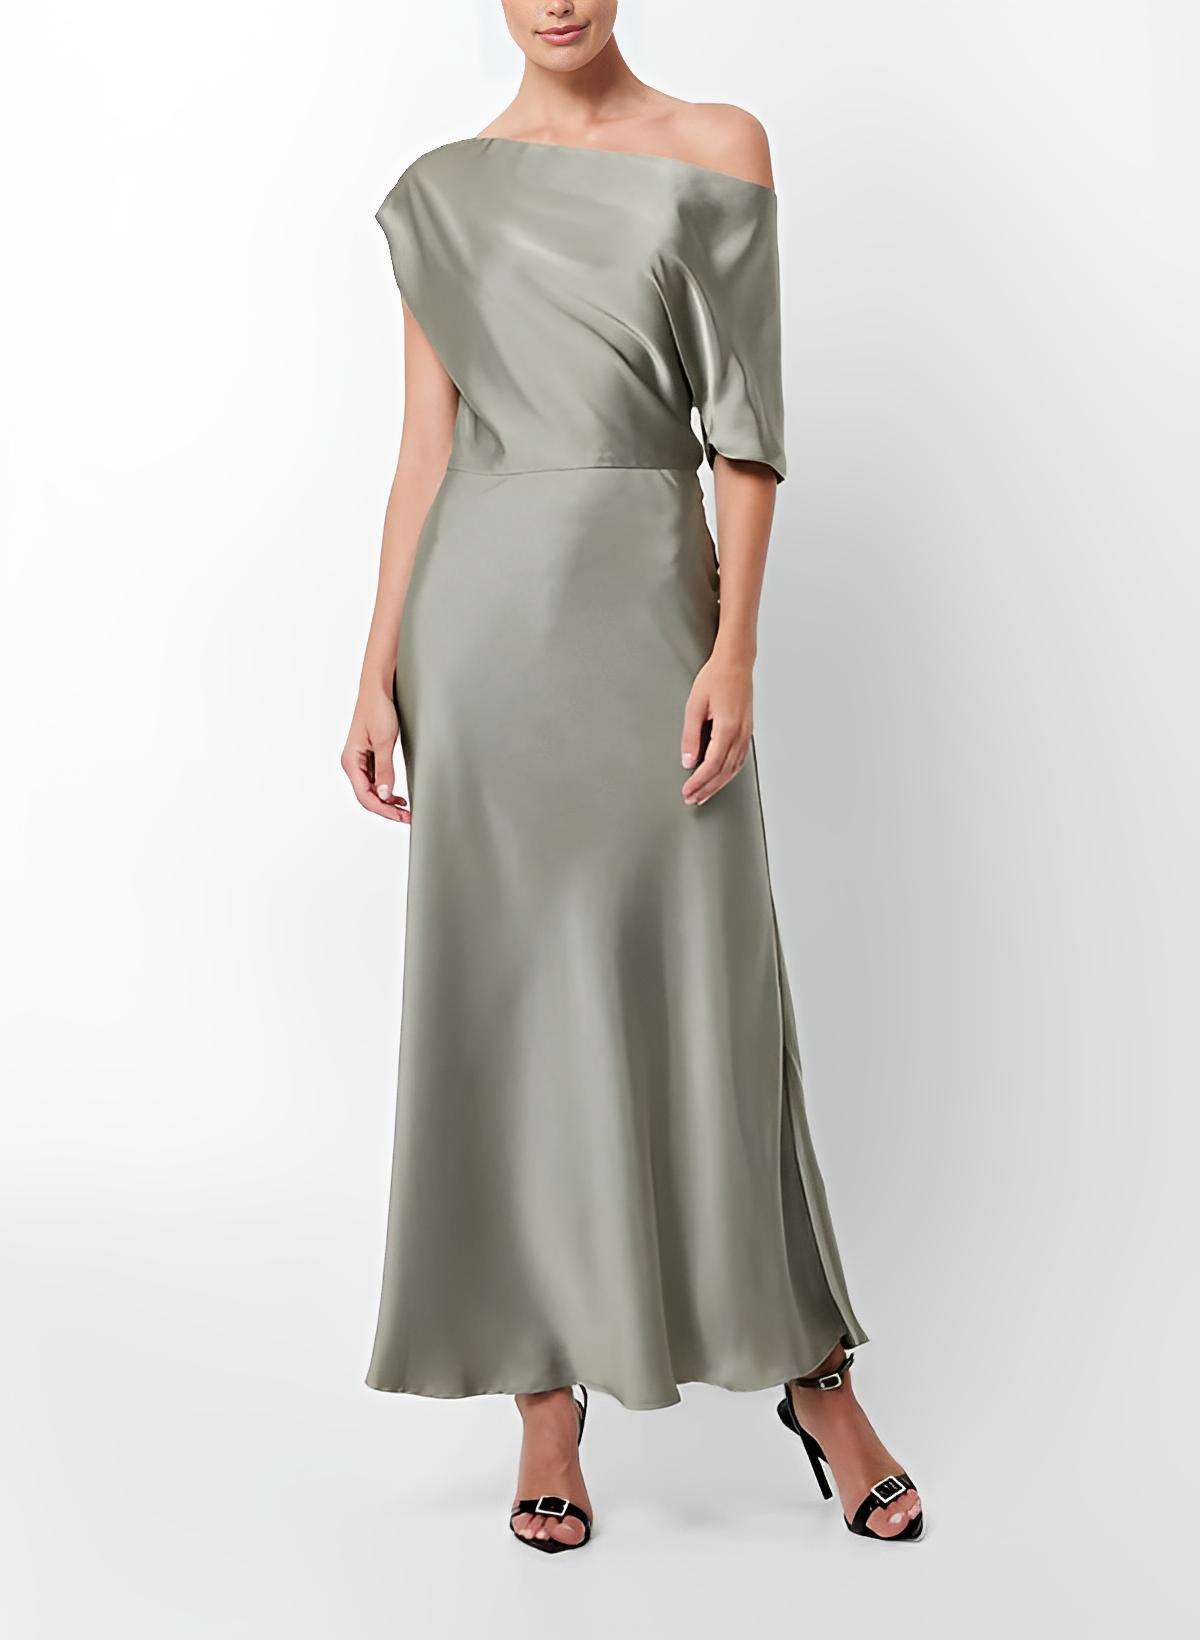 Elegant A-Line Ankle-Length Charmeuse Mother Of The Bride Dresses